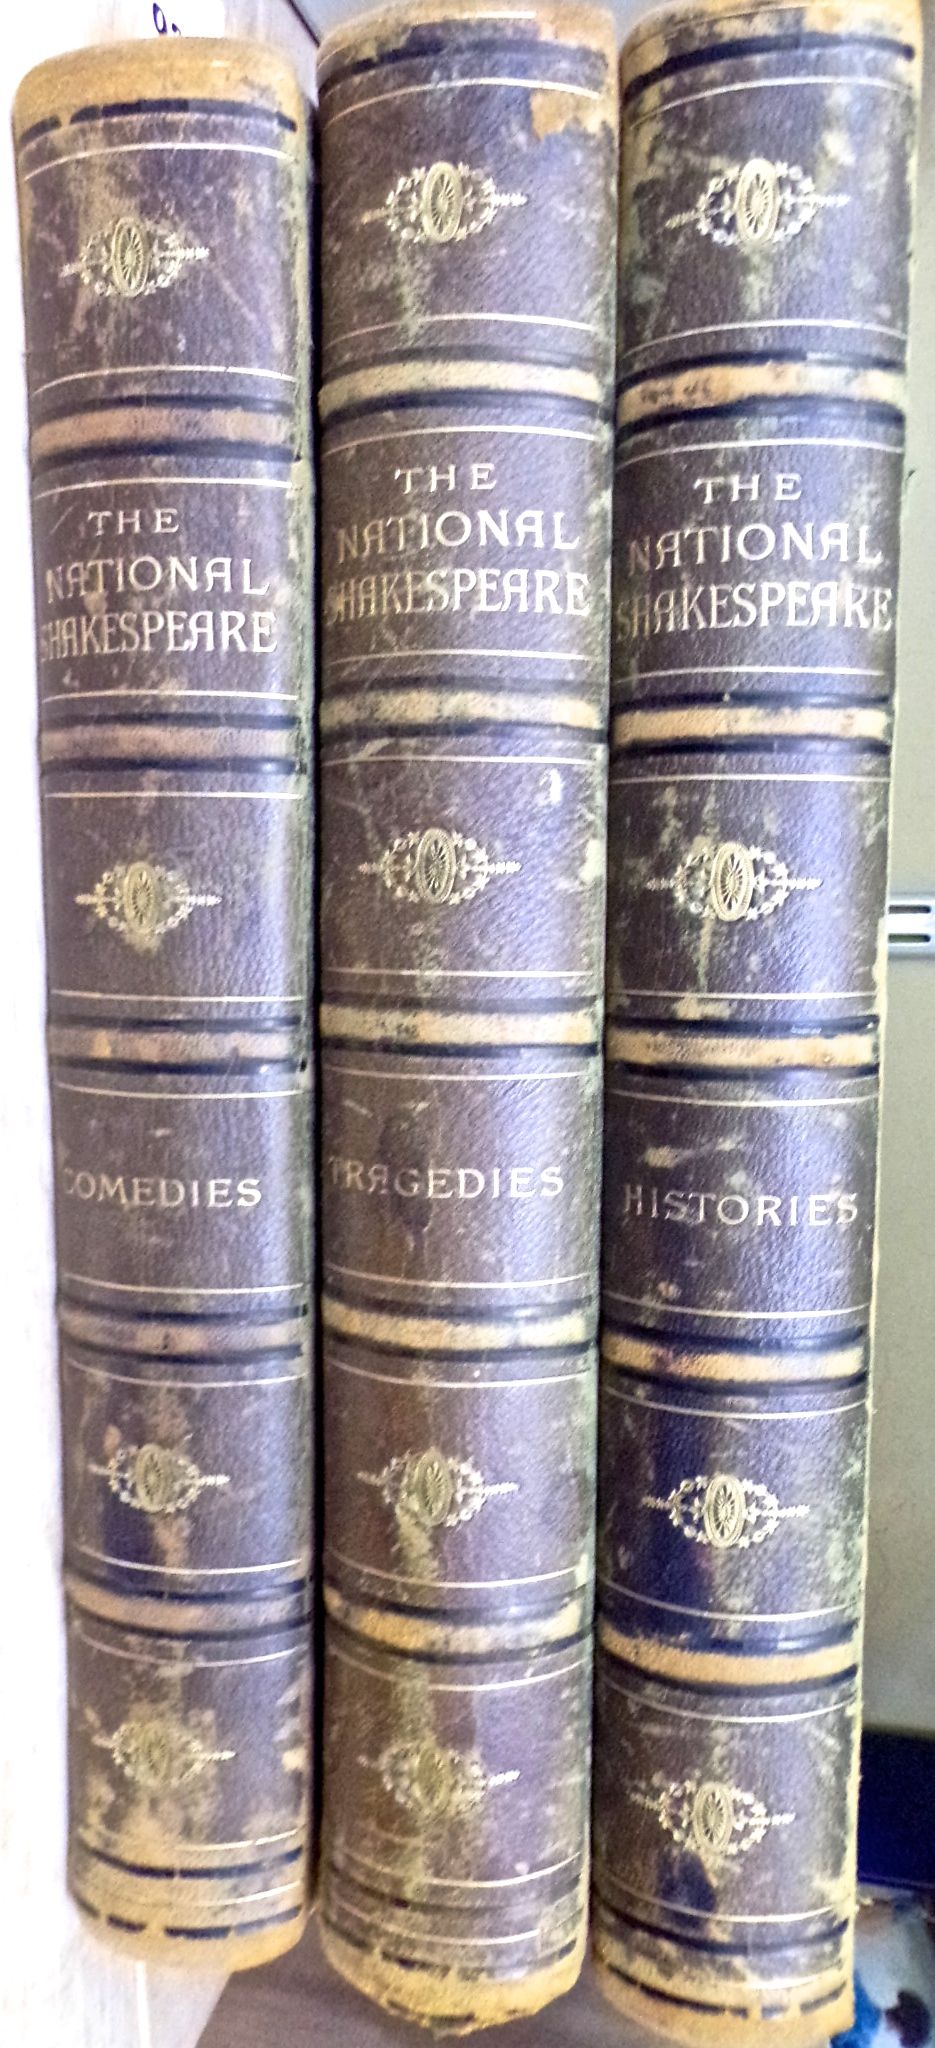 The National Shakespeare illustrated by Sir J Noel Paton, in three volumes with green leather